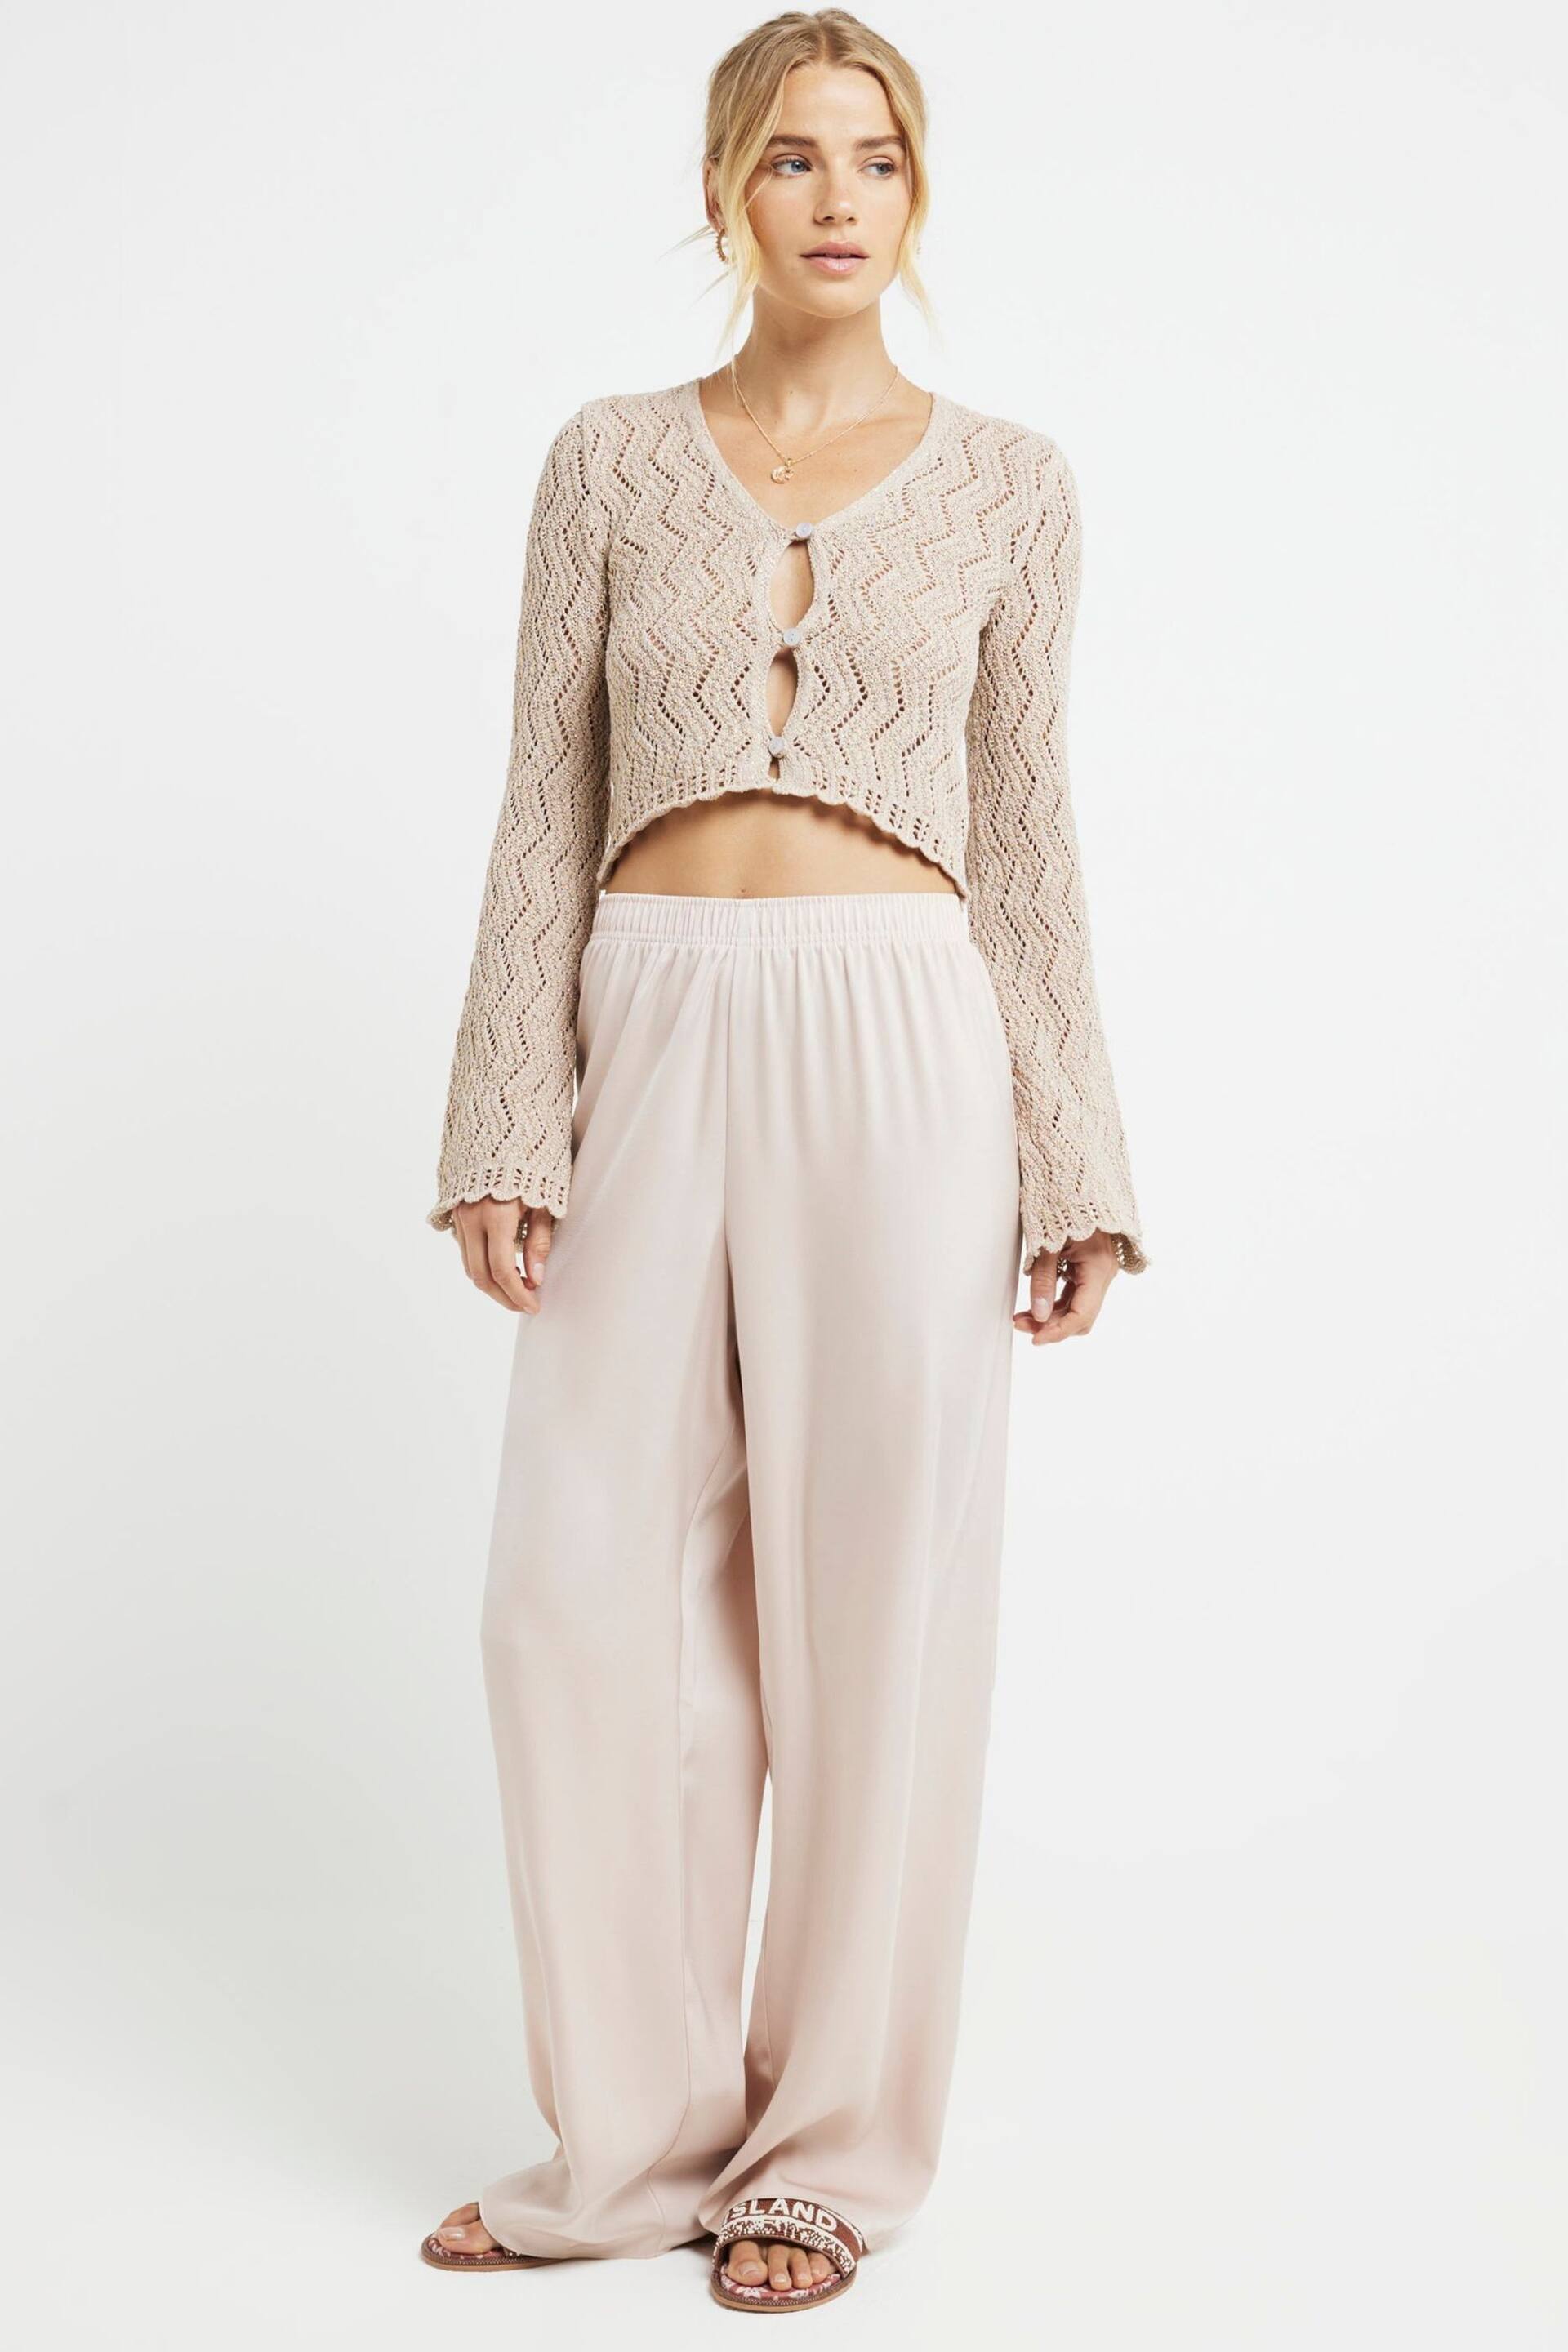 River Island Pink Satin Pull On Elasticated Trousers - Image 1 of 4